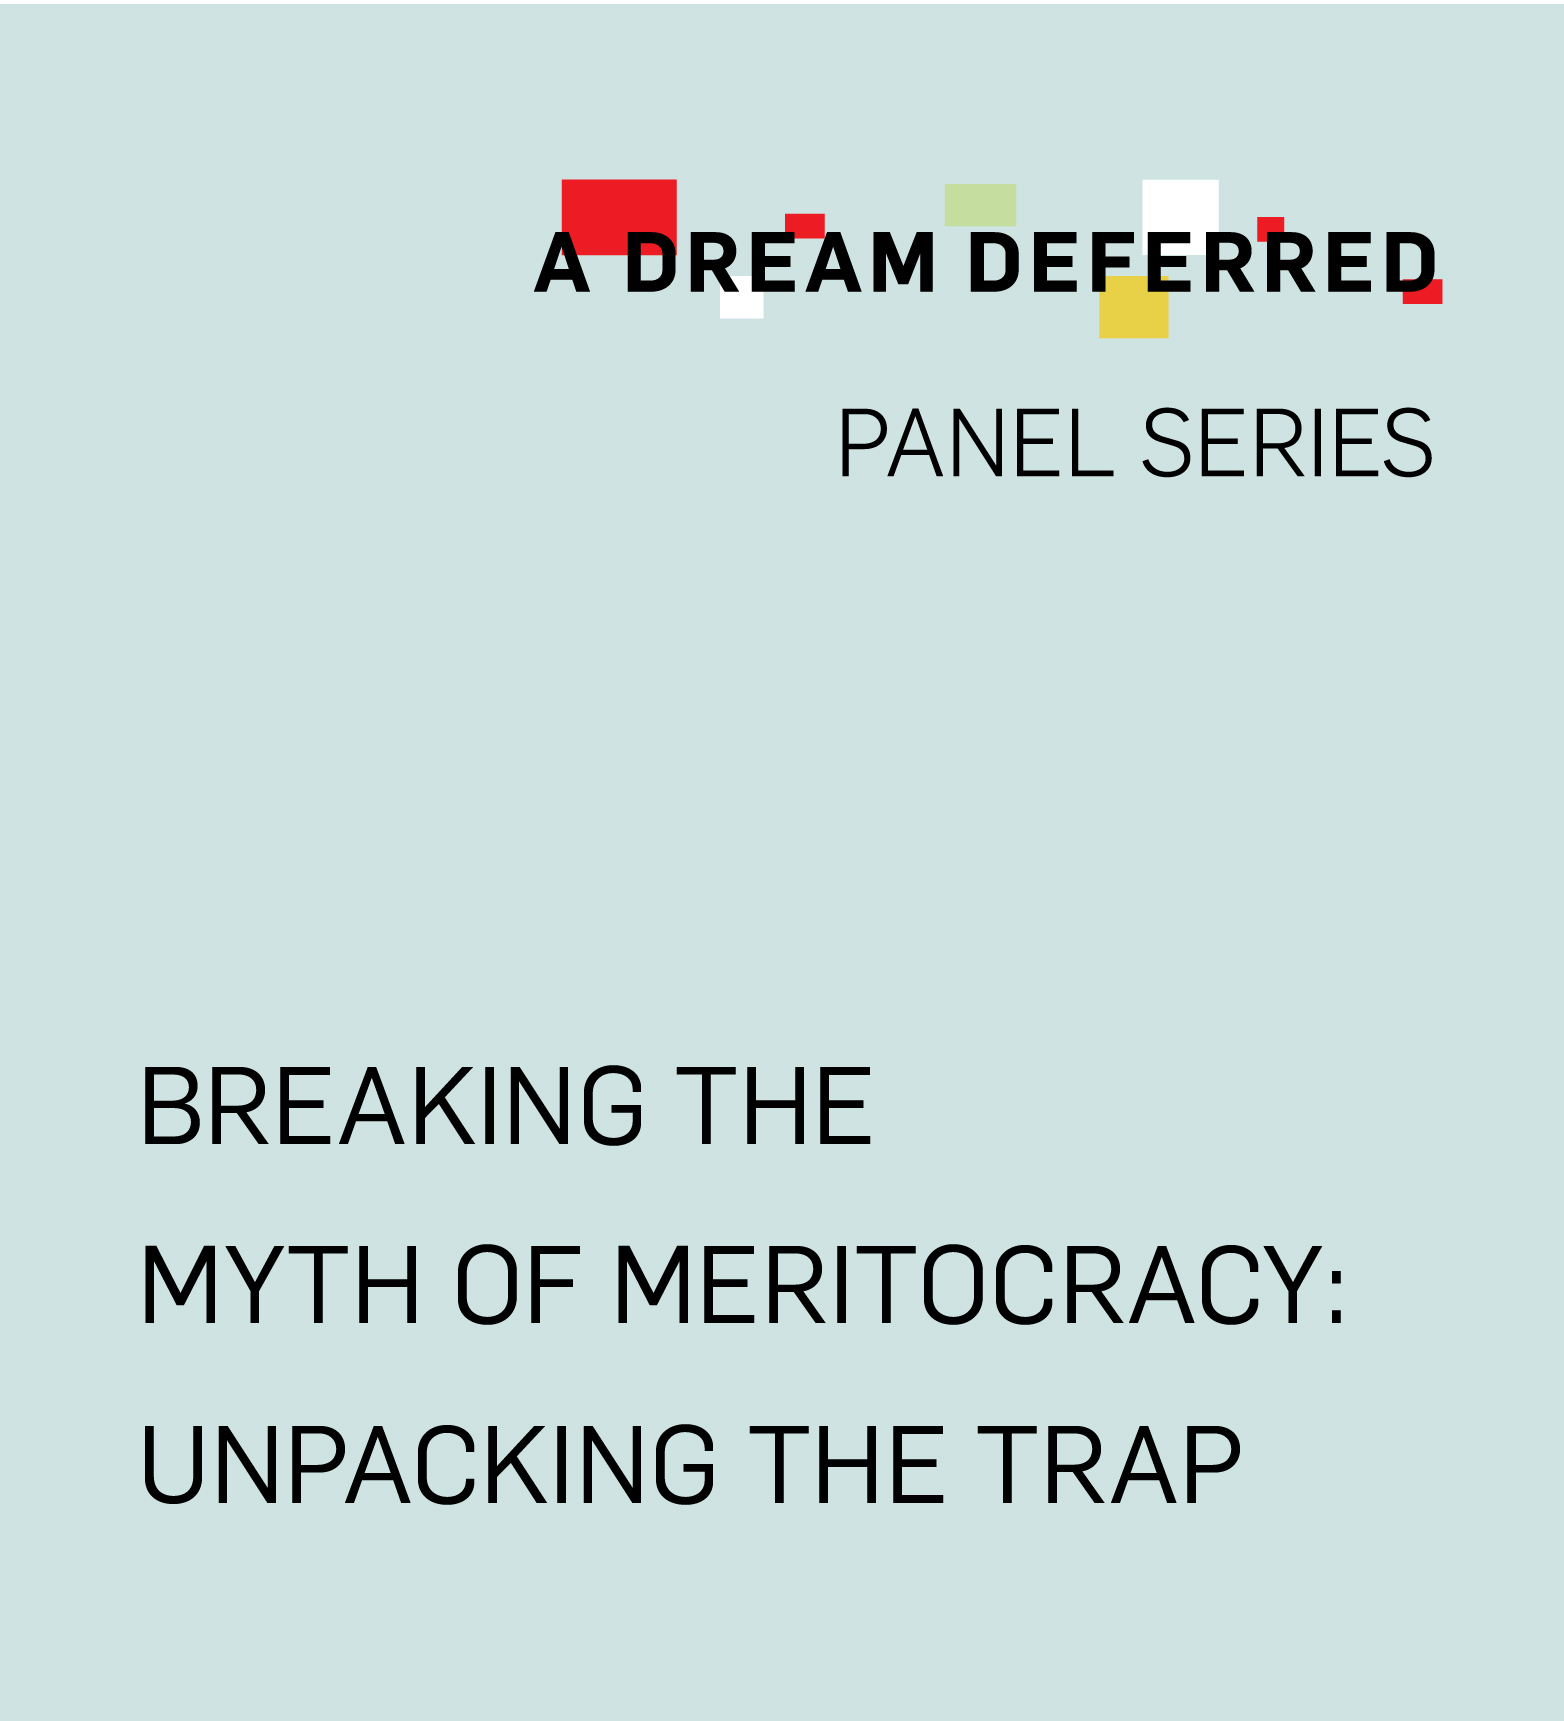 Breaking the Myth of Meritocracy Panel Series: Unpacking the trap